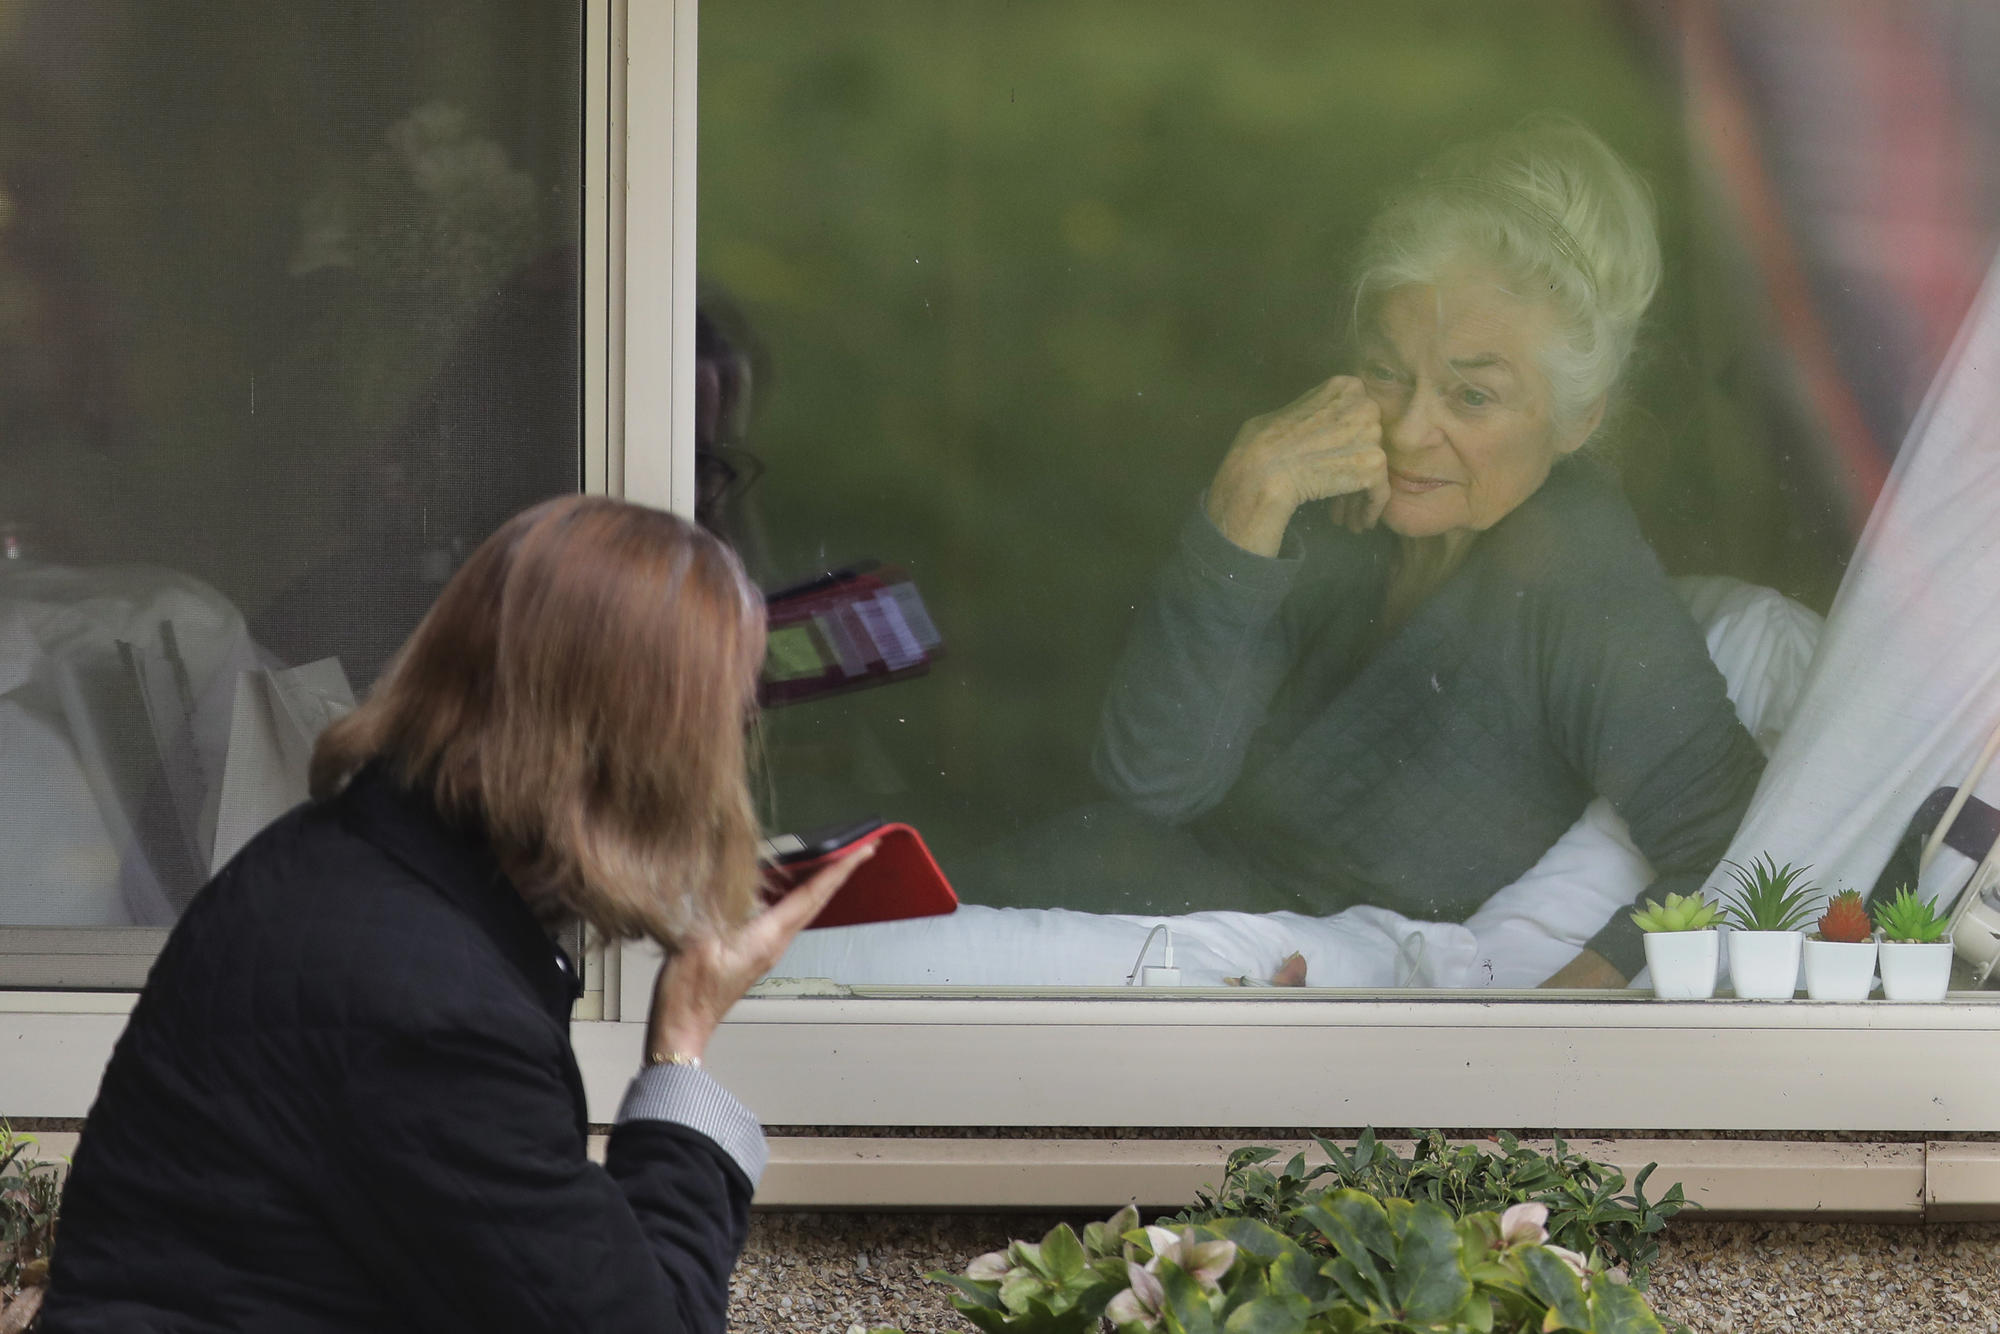 A coronavirus patient visits with her daughter through a window